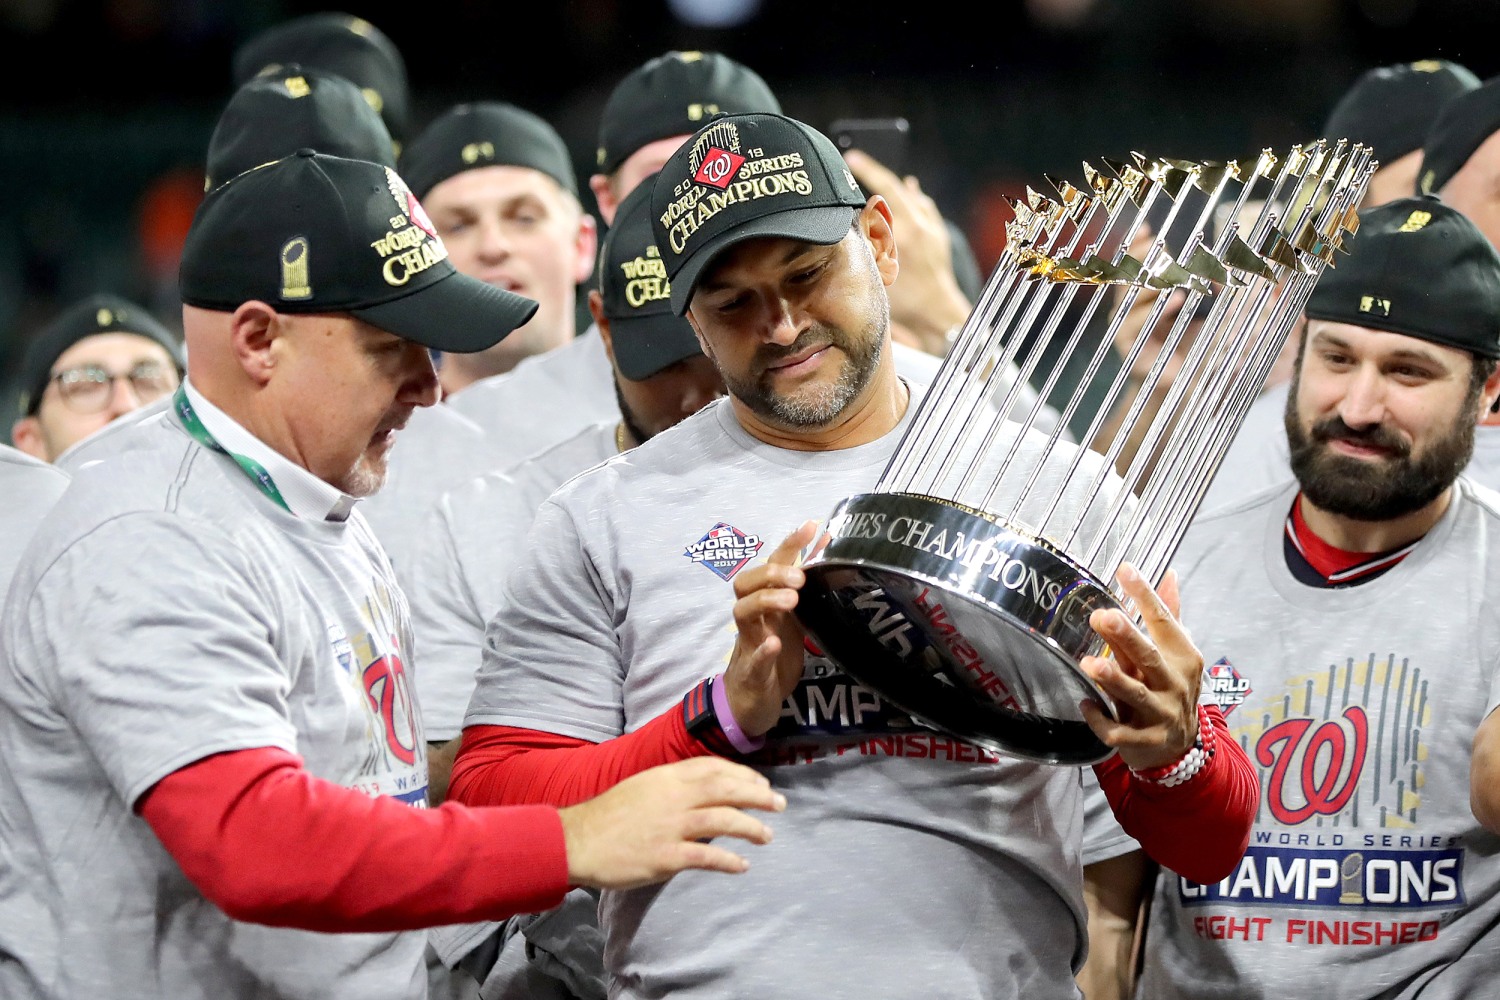 The Nationals Are World Series Champions Now, But Who Will Stay